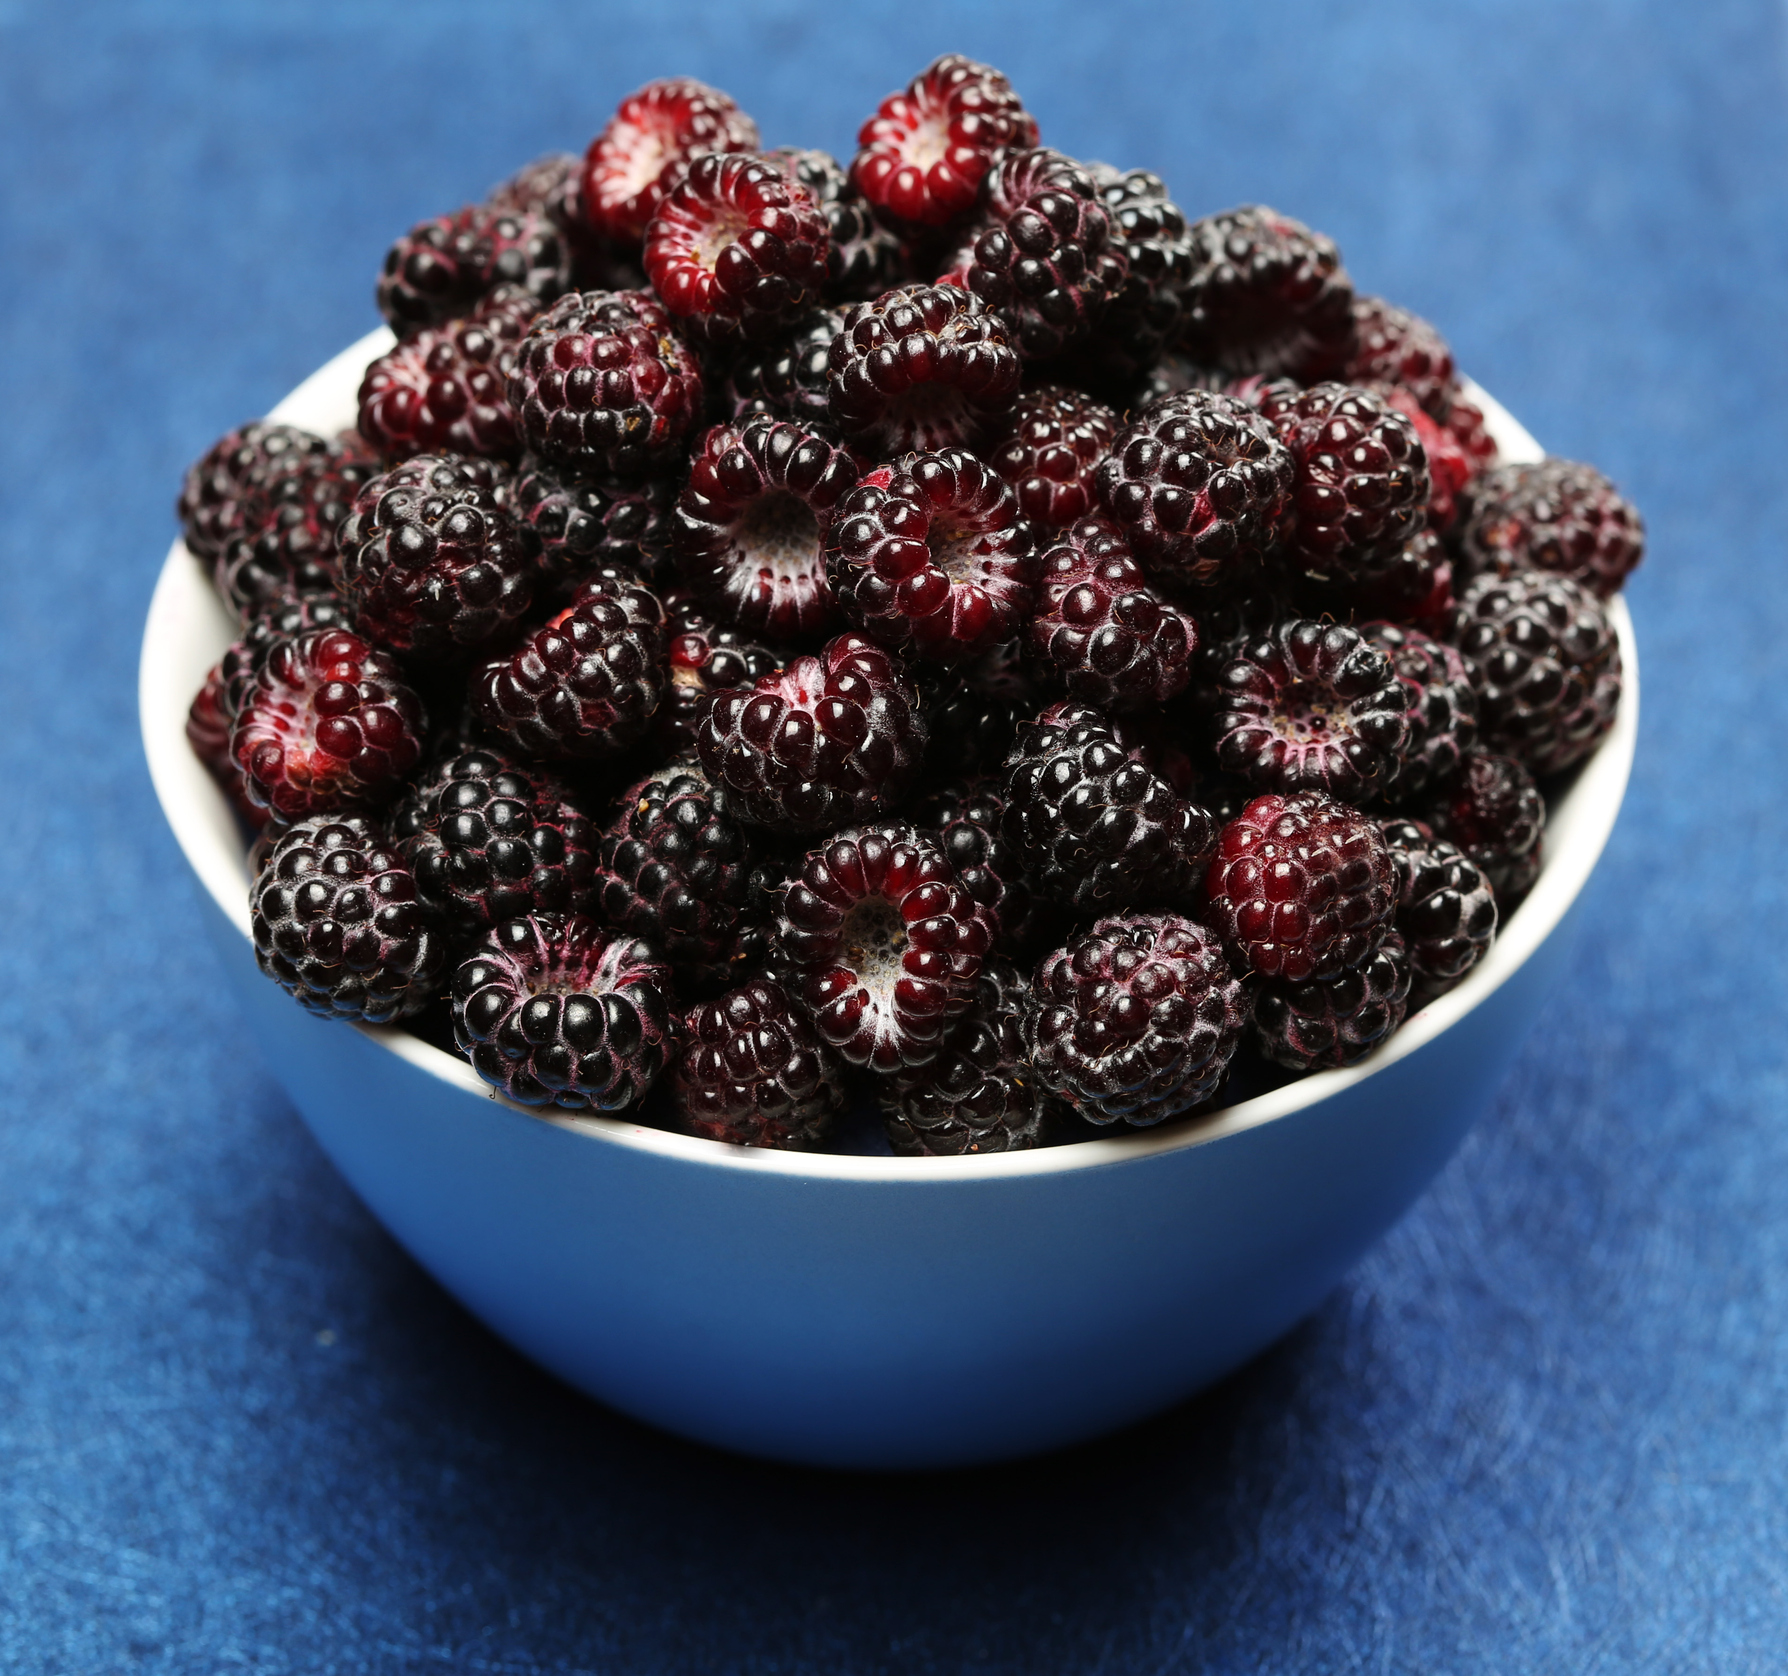 Eat this summer berry to soothe skin rashes